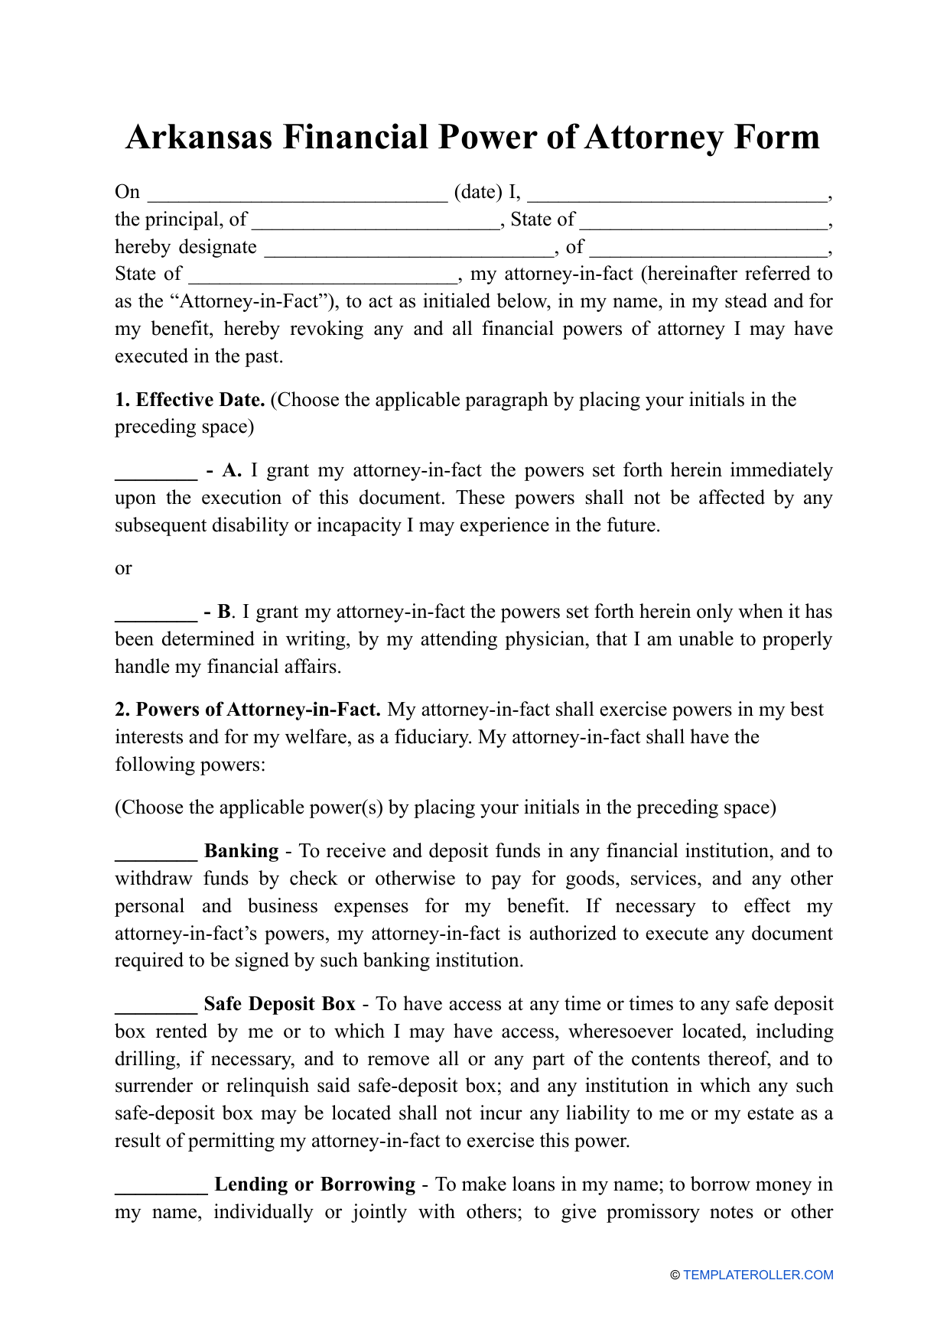 Financial Power of Attorney Form - Arkansas, Page 1